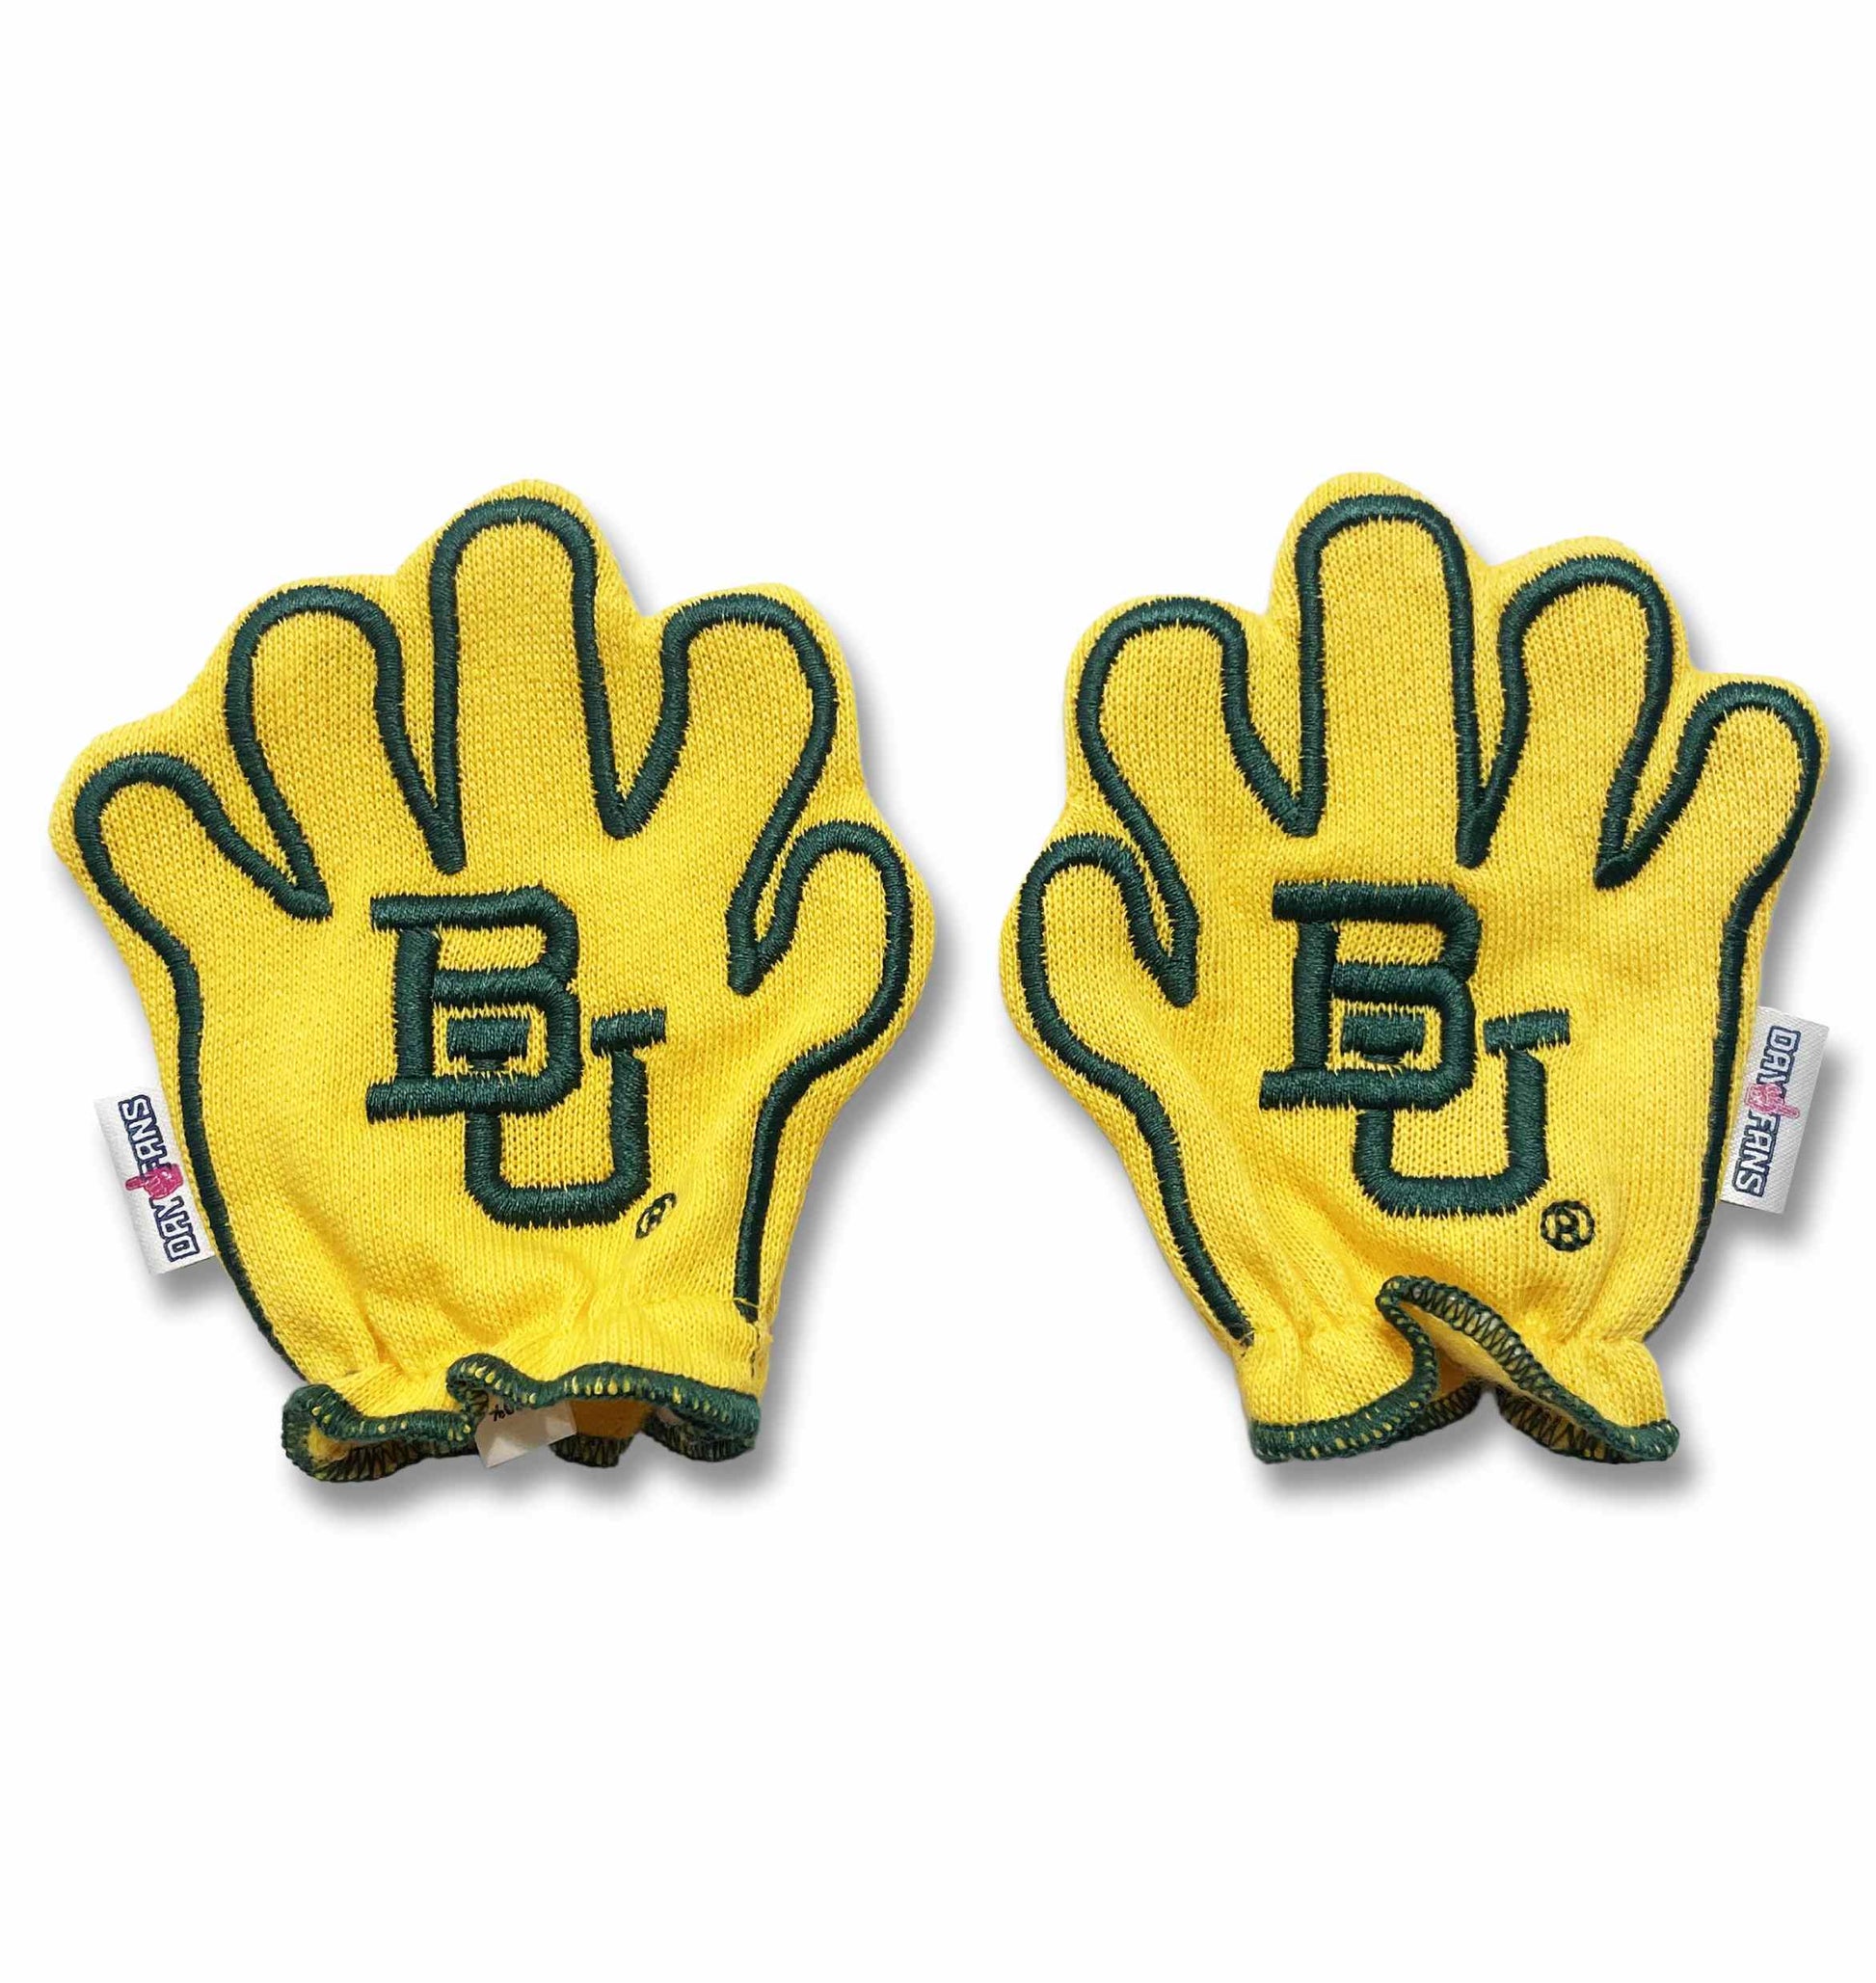 Baylor Sic Em FanMitts Baby Mittens University Yellow Back Pair